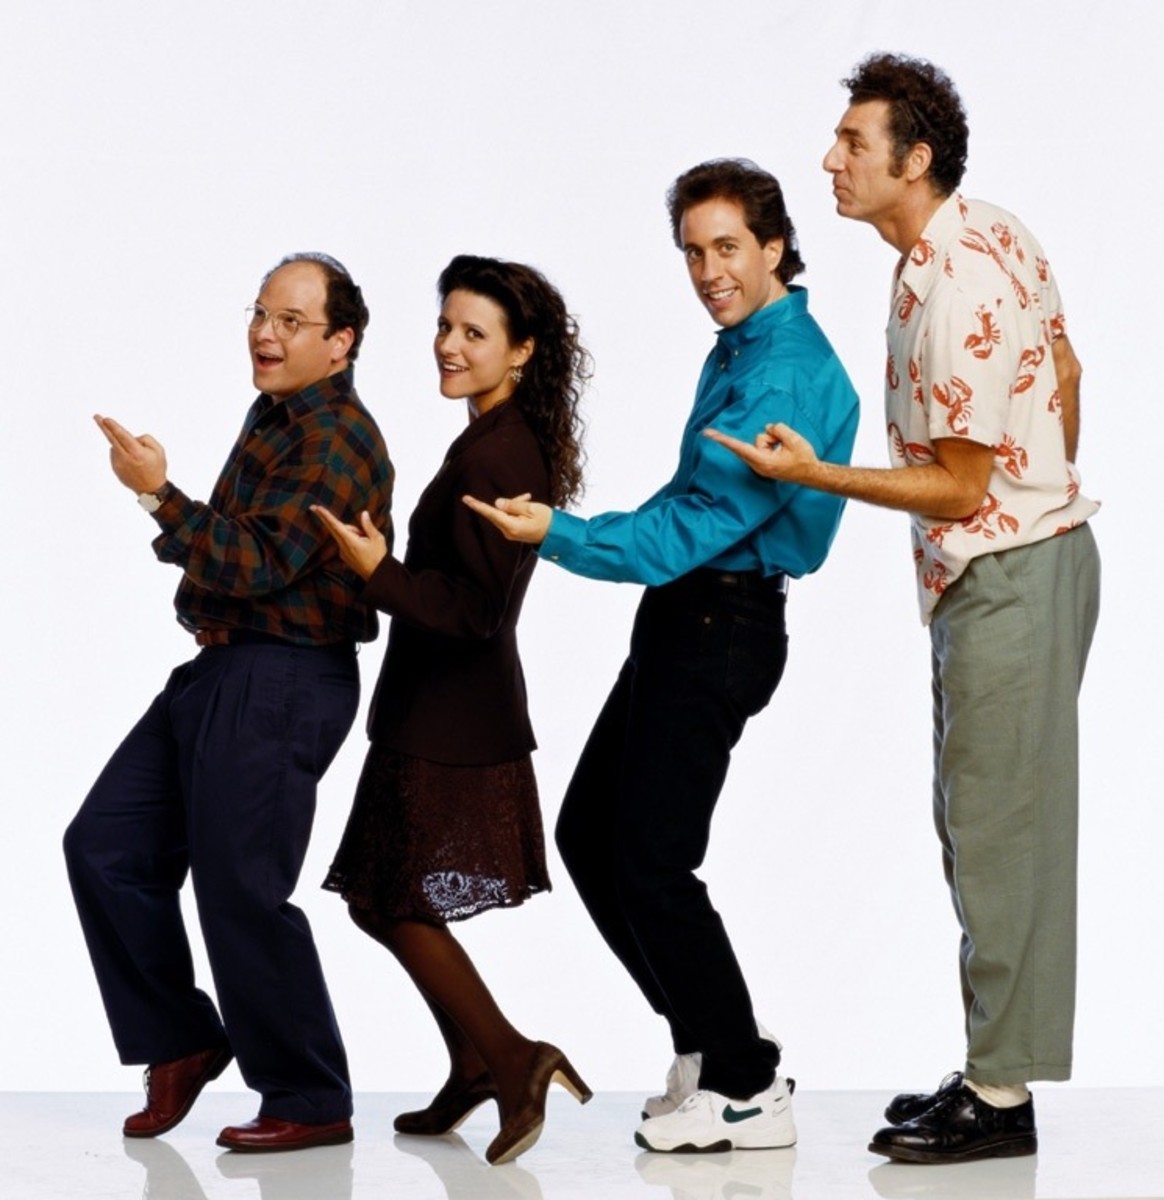 Top 5 Underrated Episodes of Seinfeld